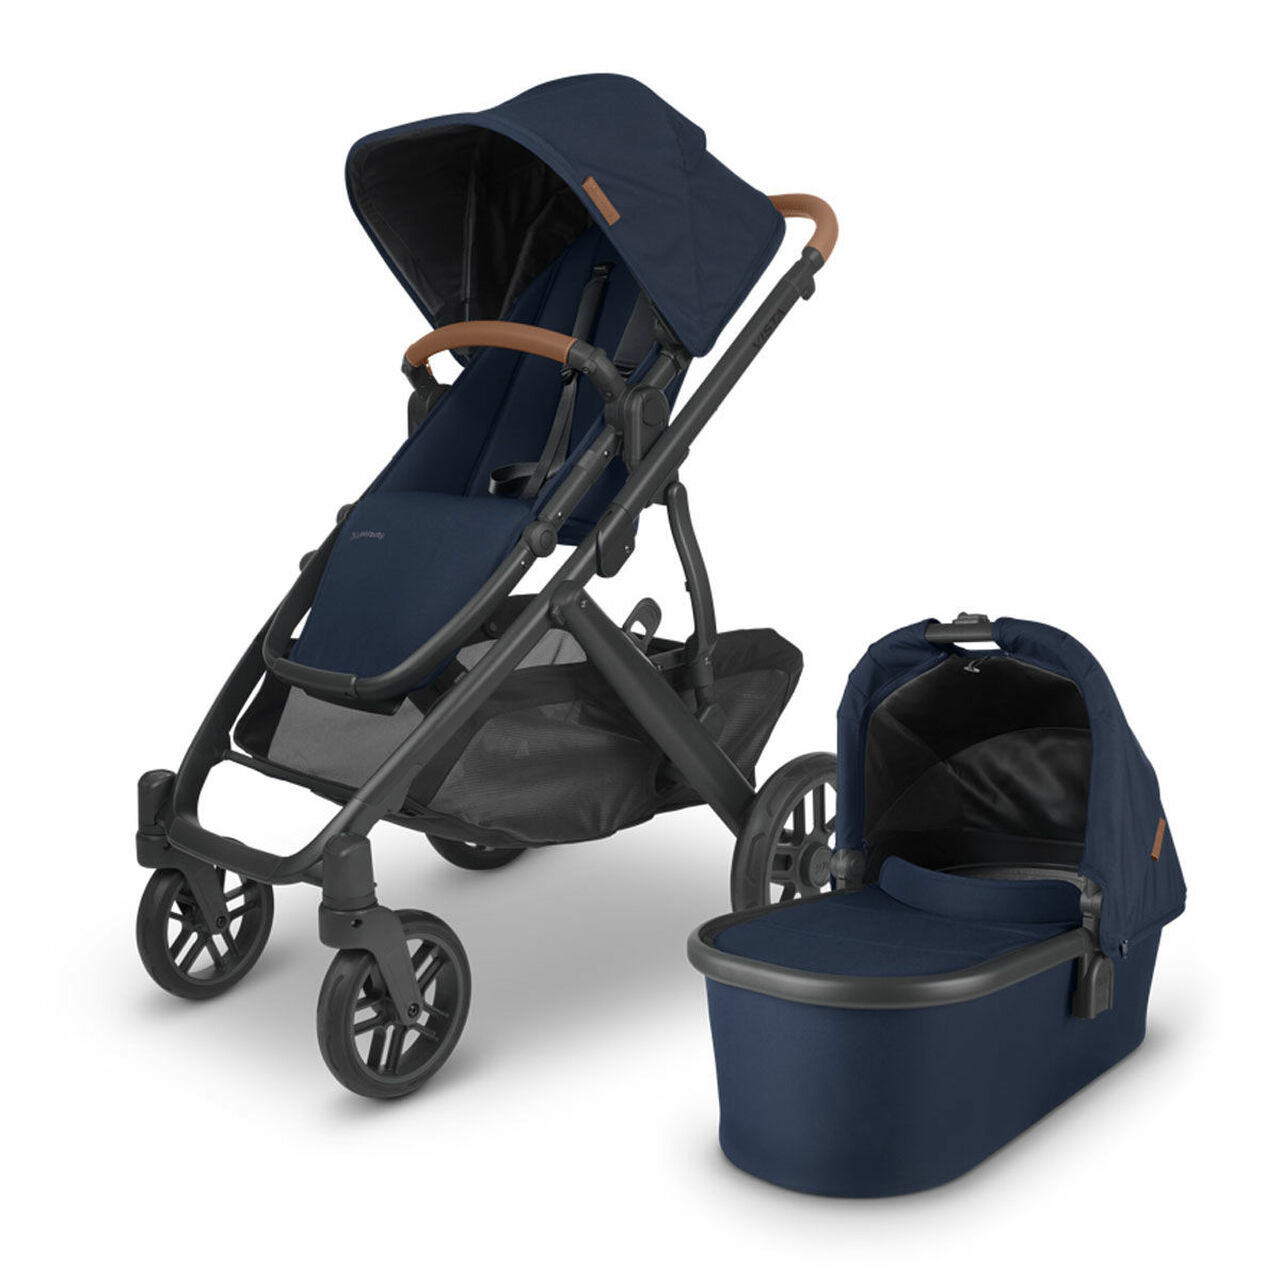 https://www.activebaby.ca/gear-travel/strollers/uppababy-vista-v2-stroller-noa-navy-carbon-saddle-leather/